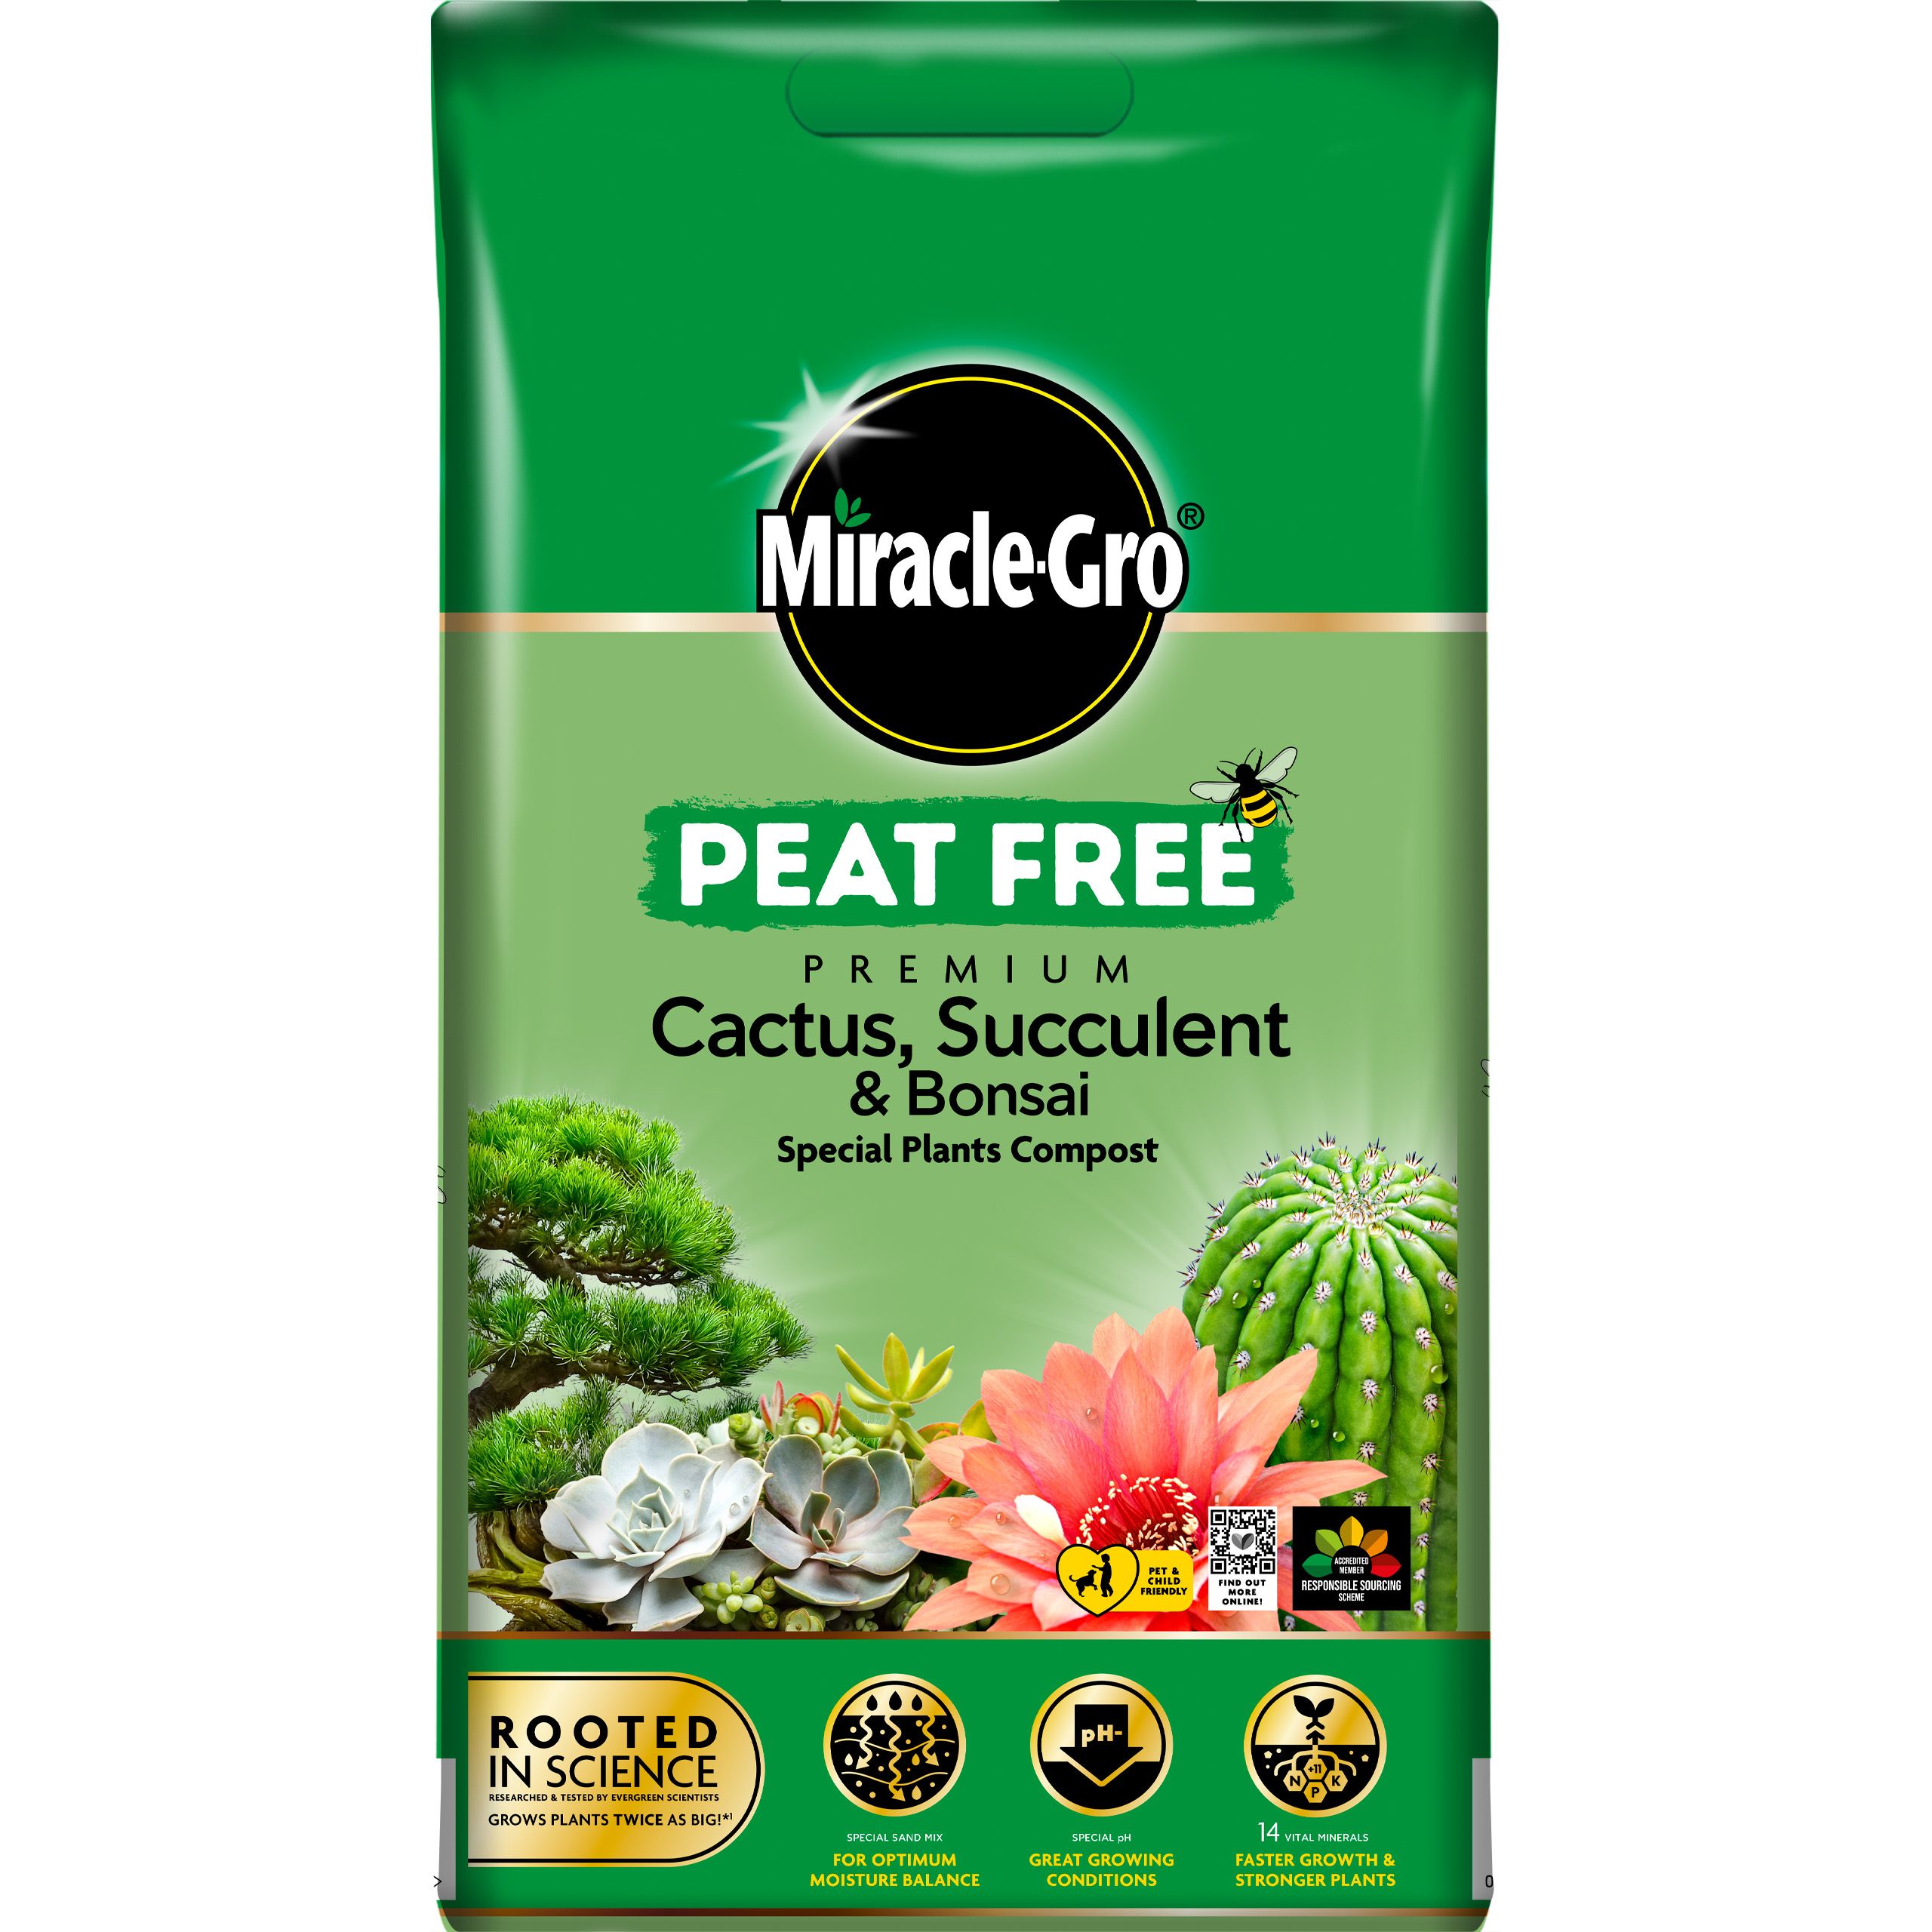 Miracle-Gro Peat-Free Cacti & Succulent Compost 10L